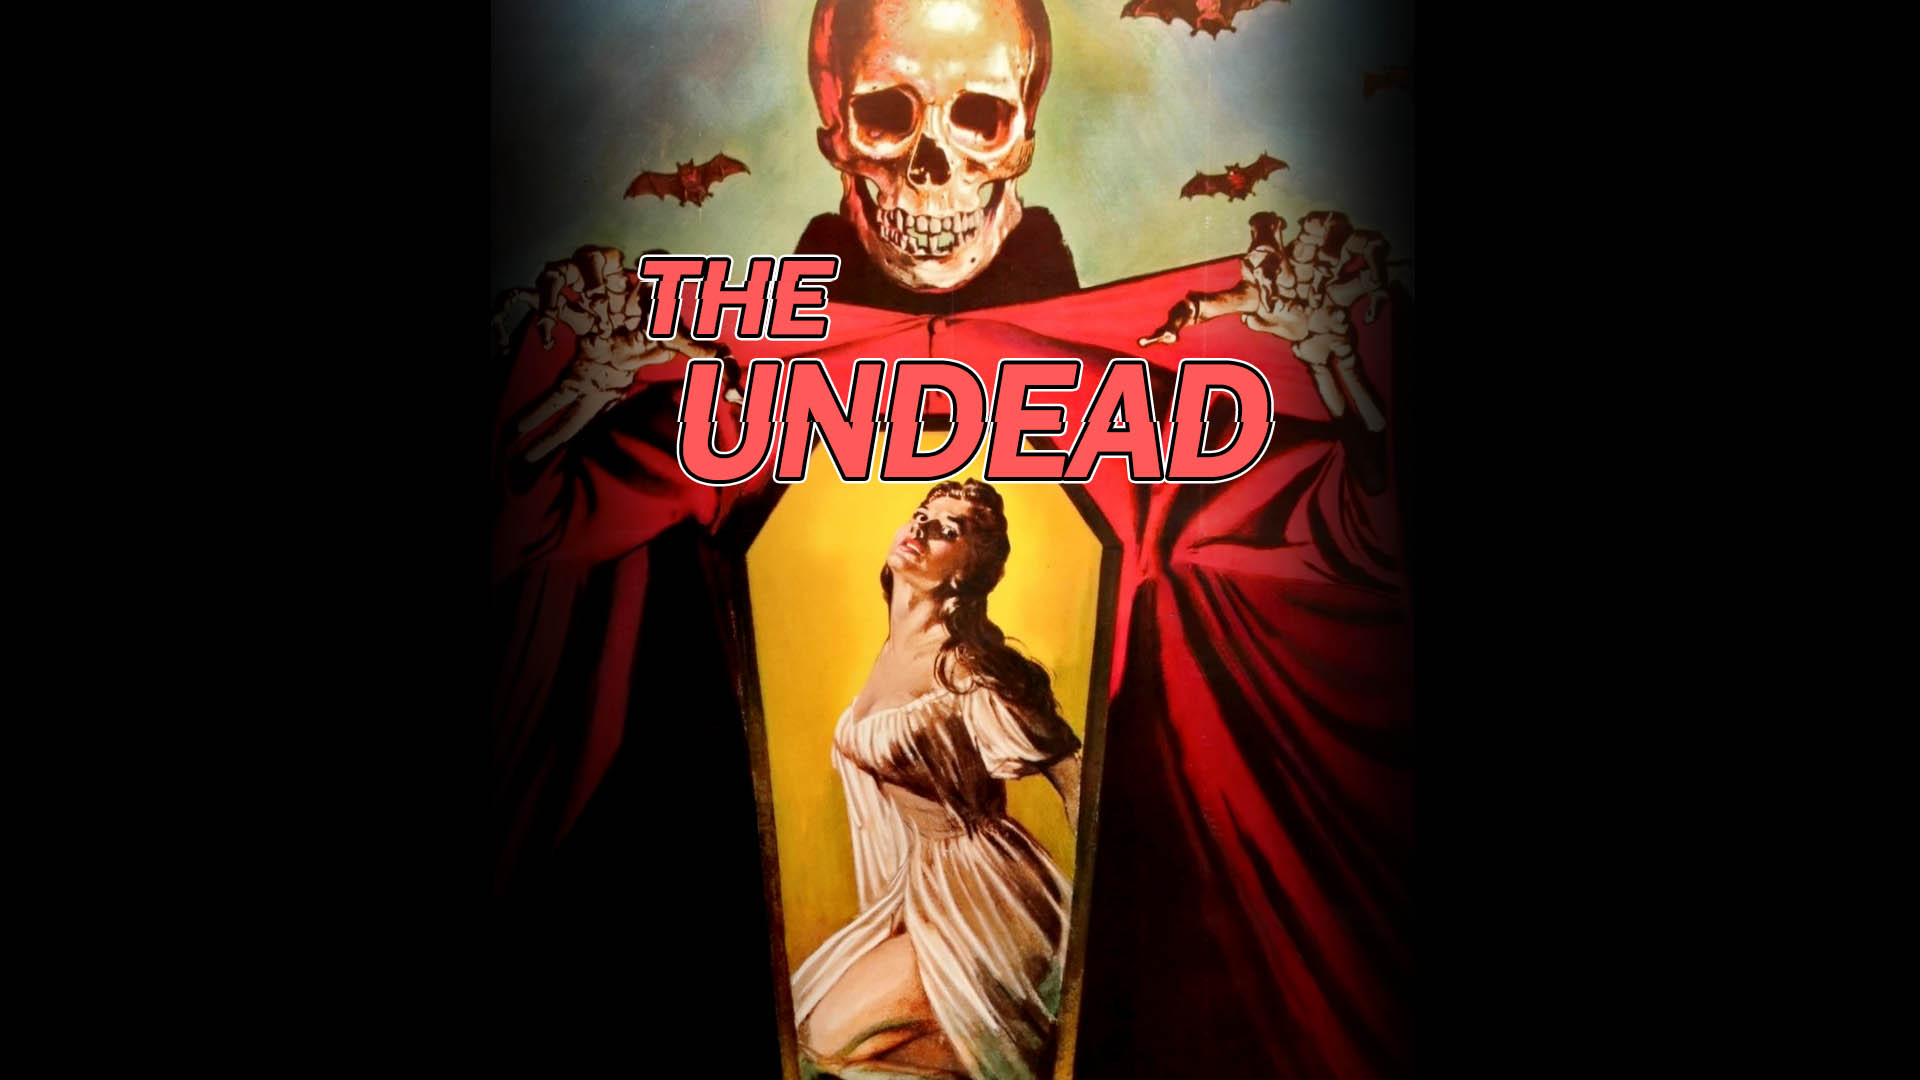 Watch The Undead Online | Stream Full Movies